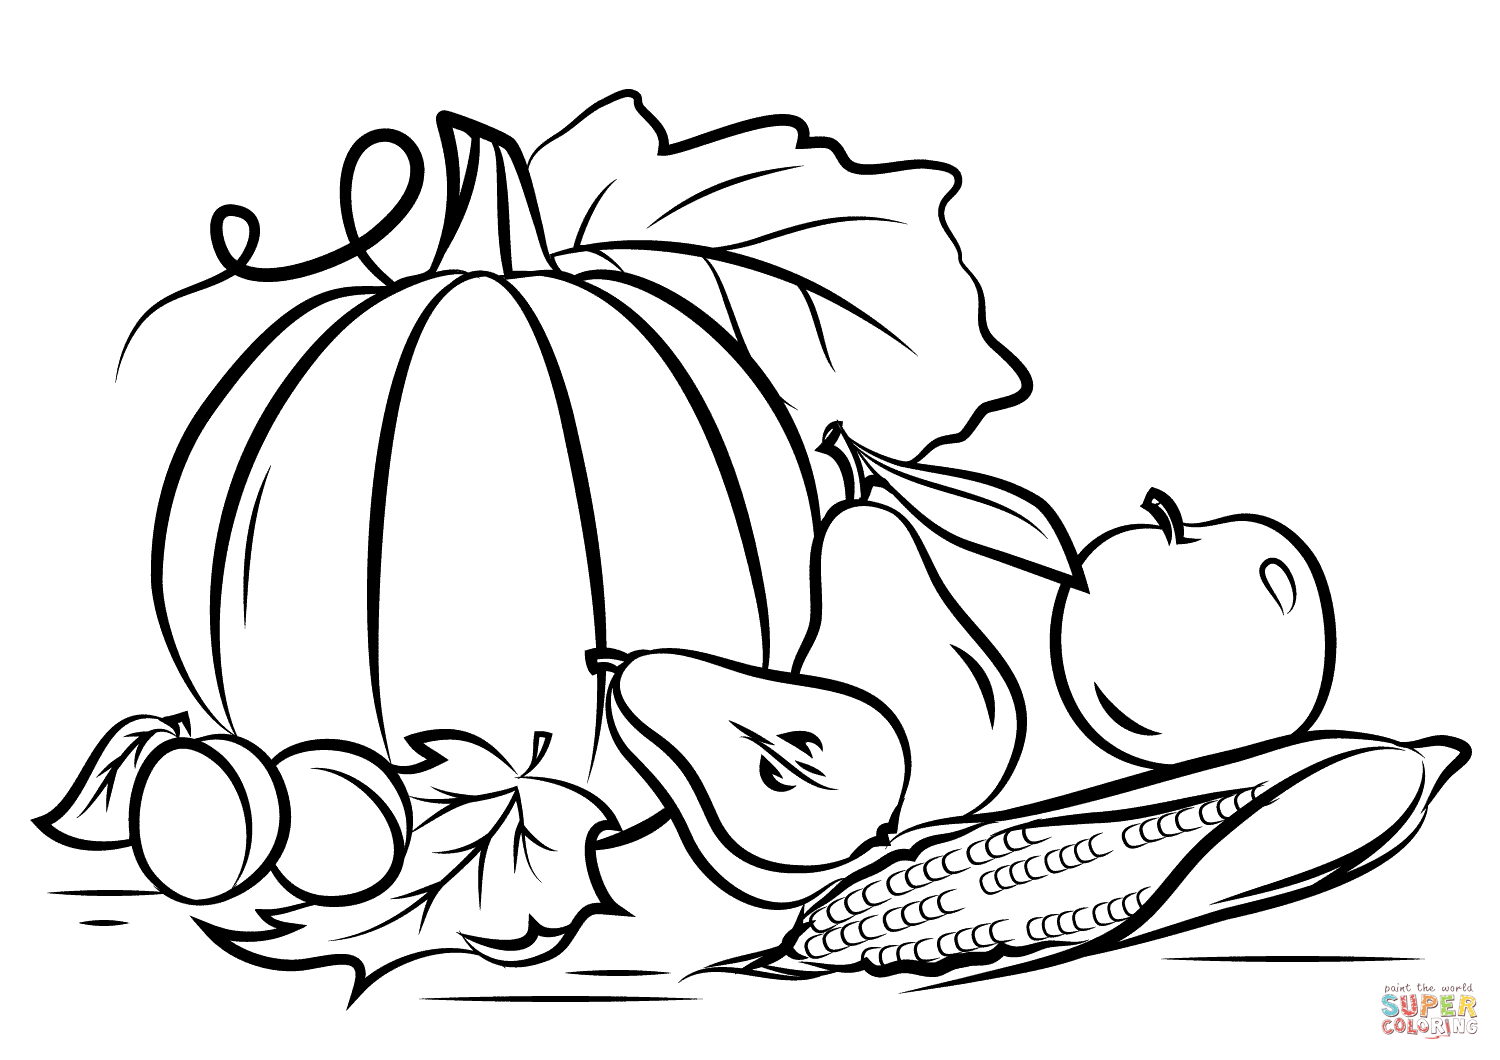 Autumn Harvest Coloring Page | Free Printable Coloring Pages - Free Printable Fall Coloring Pages